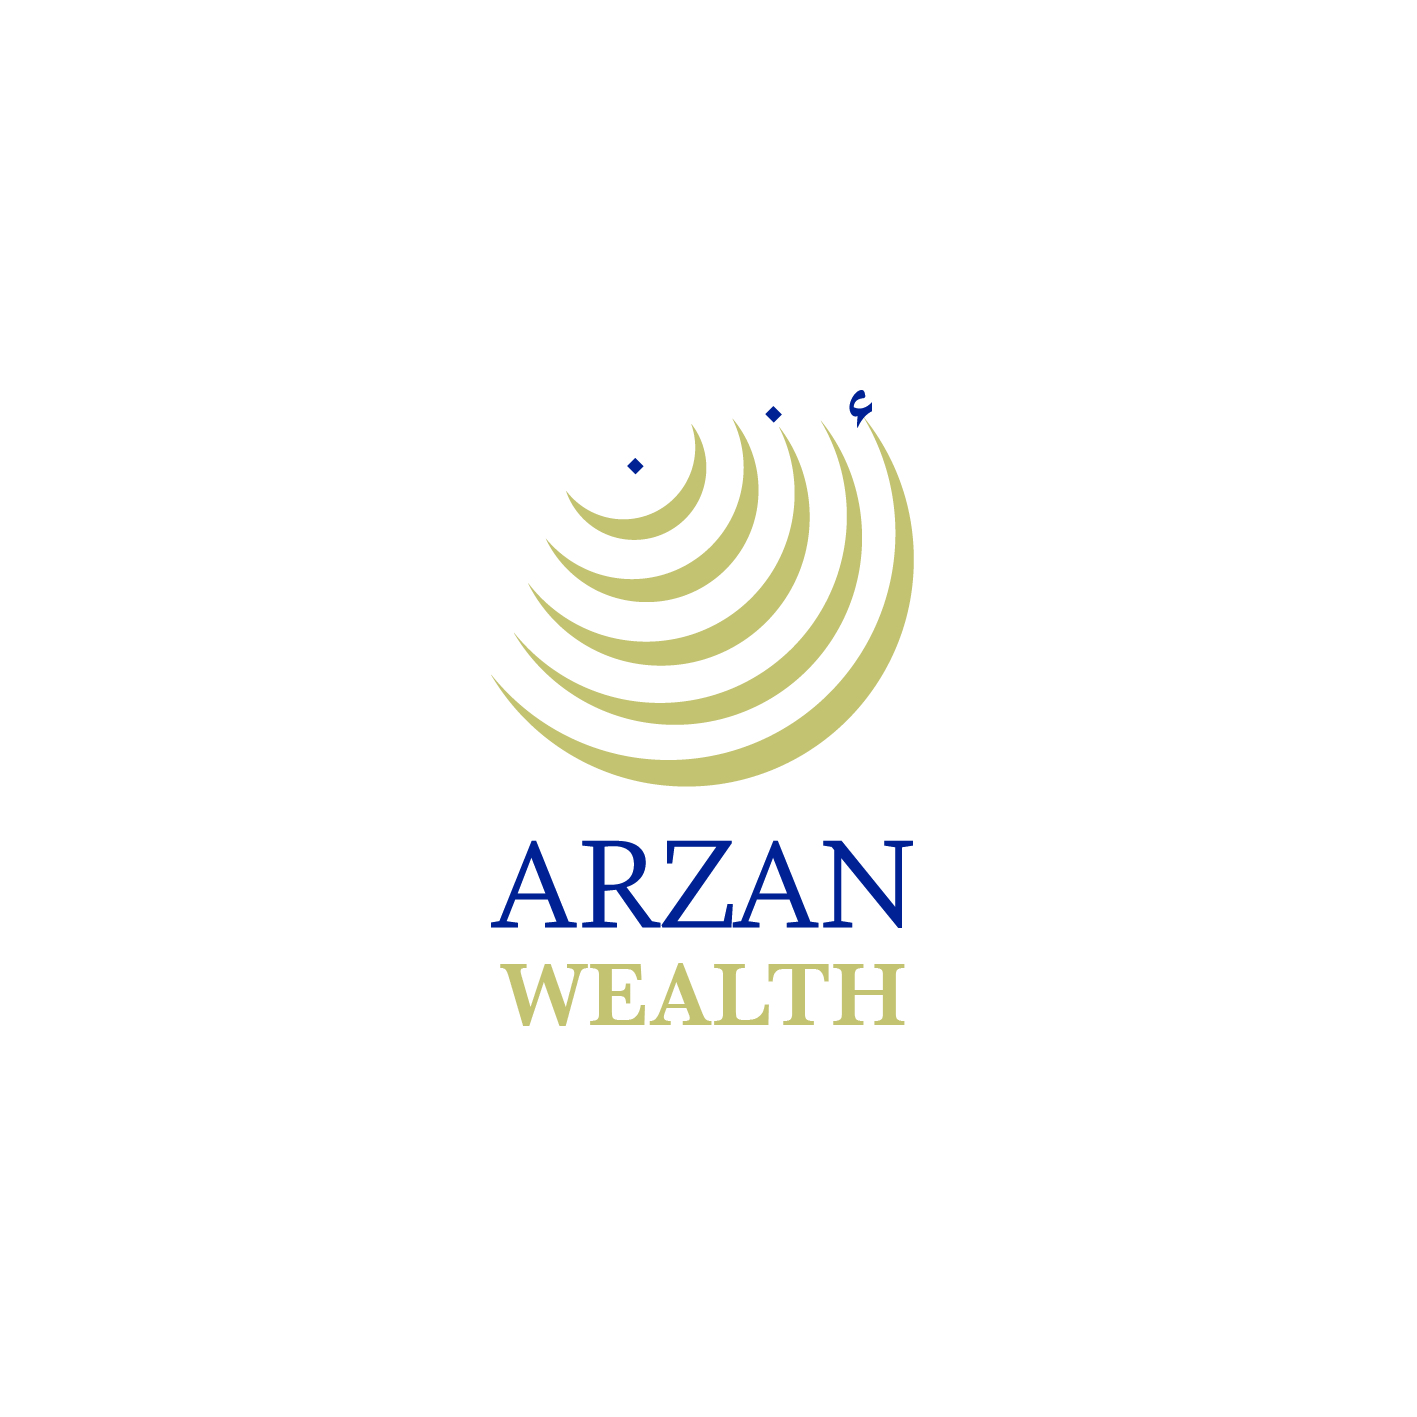 Arzan Wealth Announces Partnership with “Water For People” Helping to Reduce Global Water Poverty